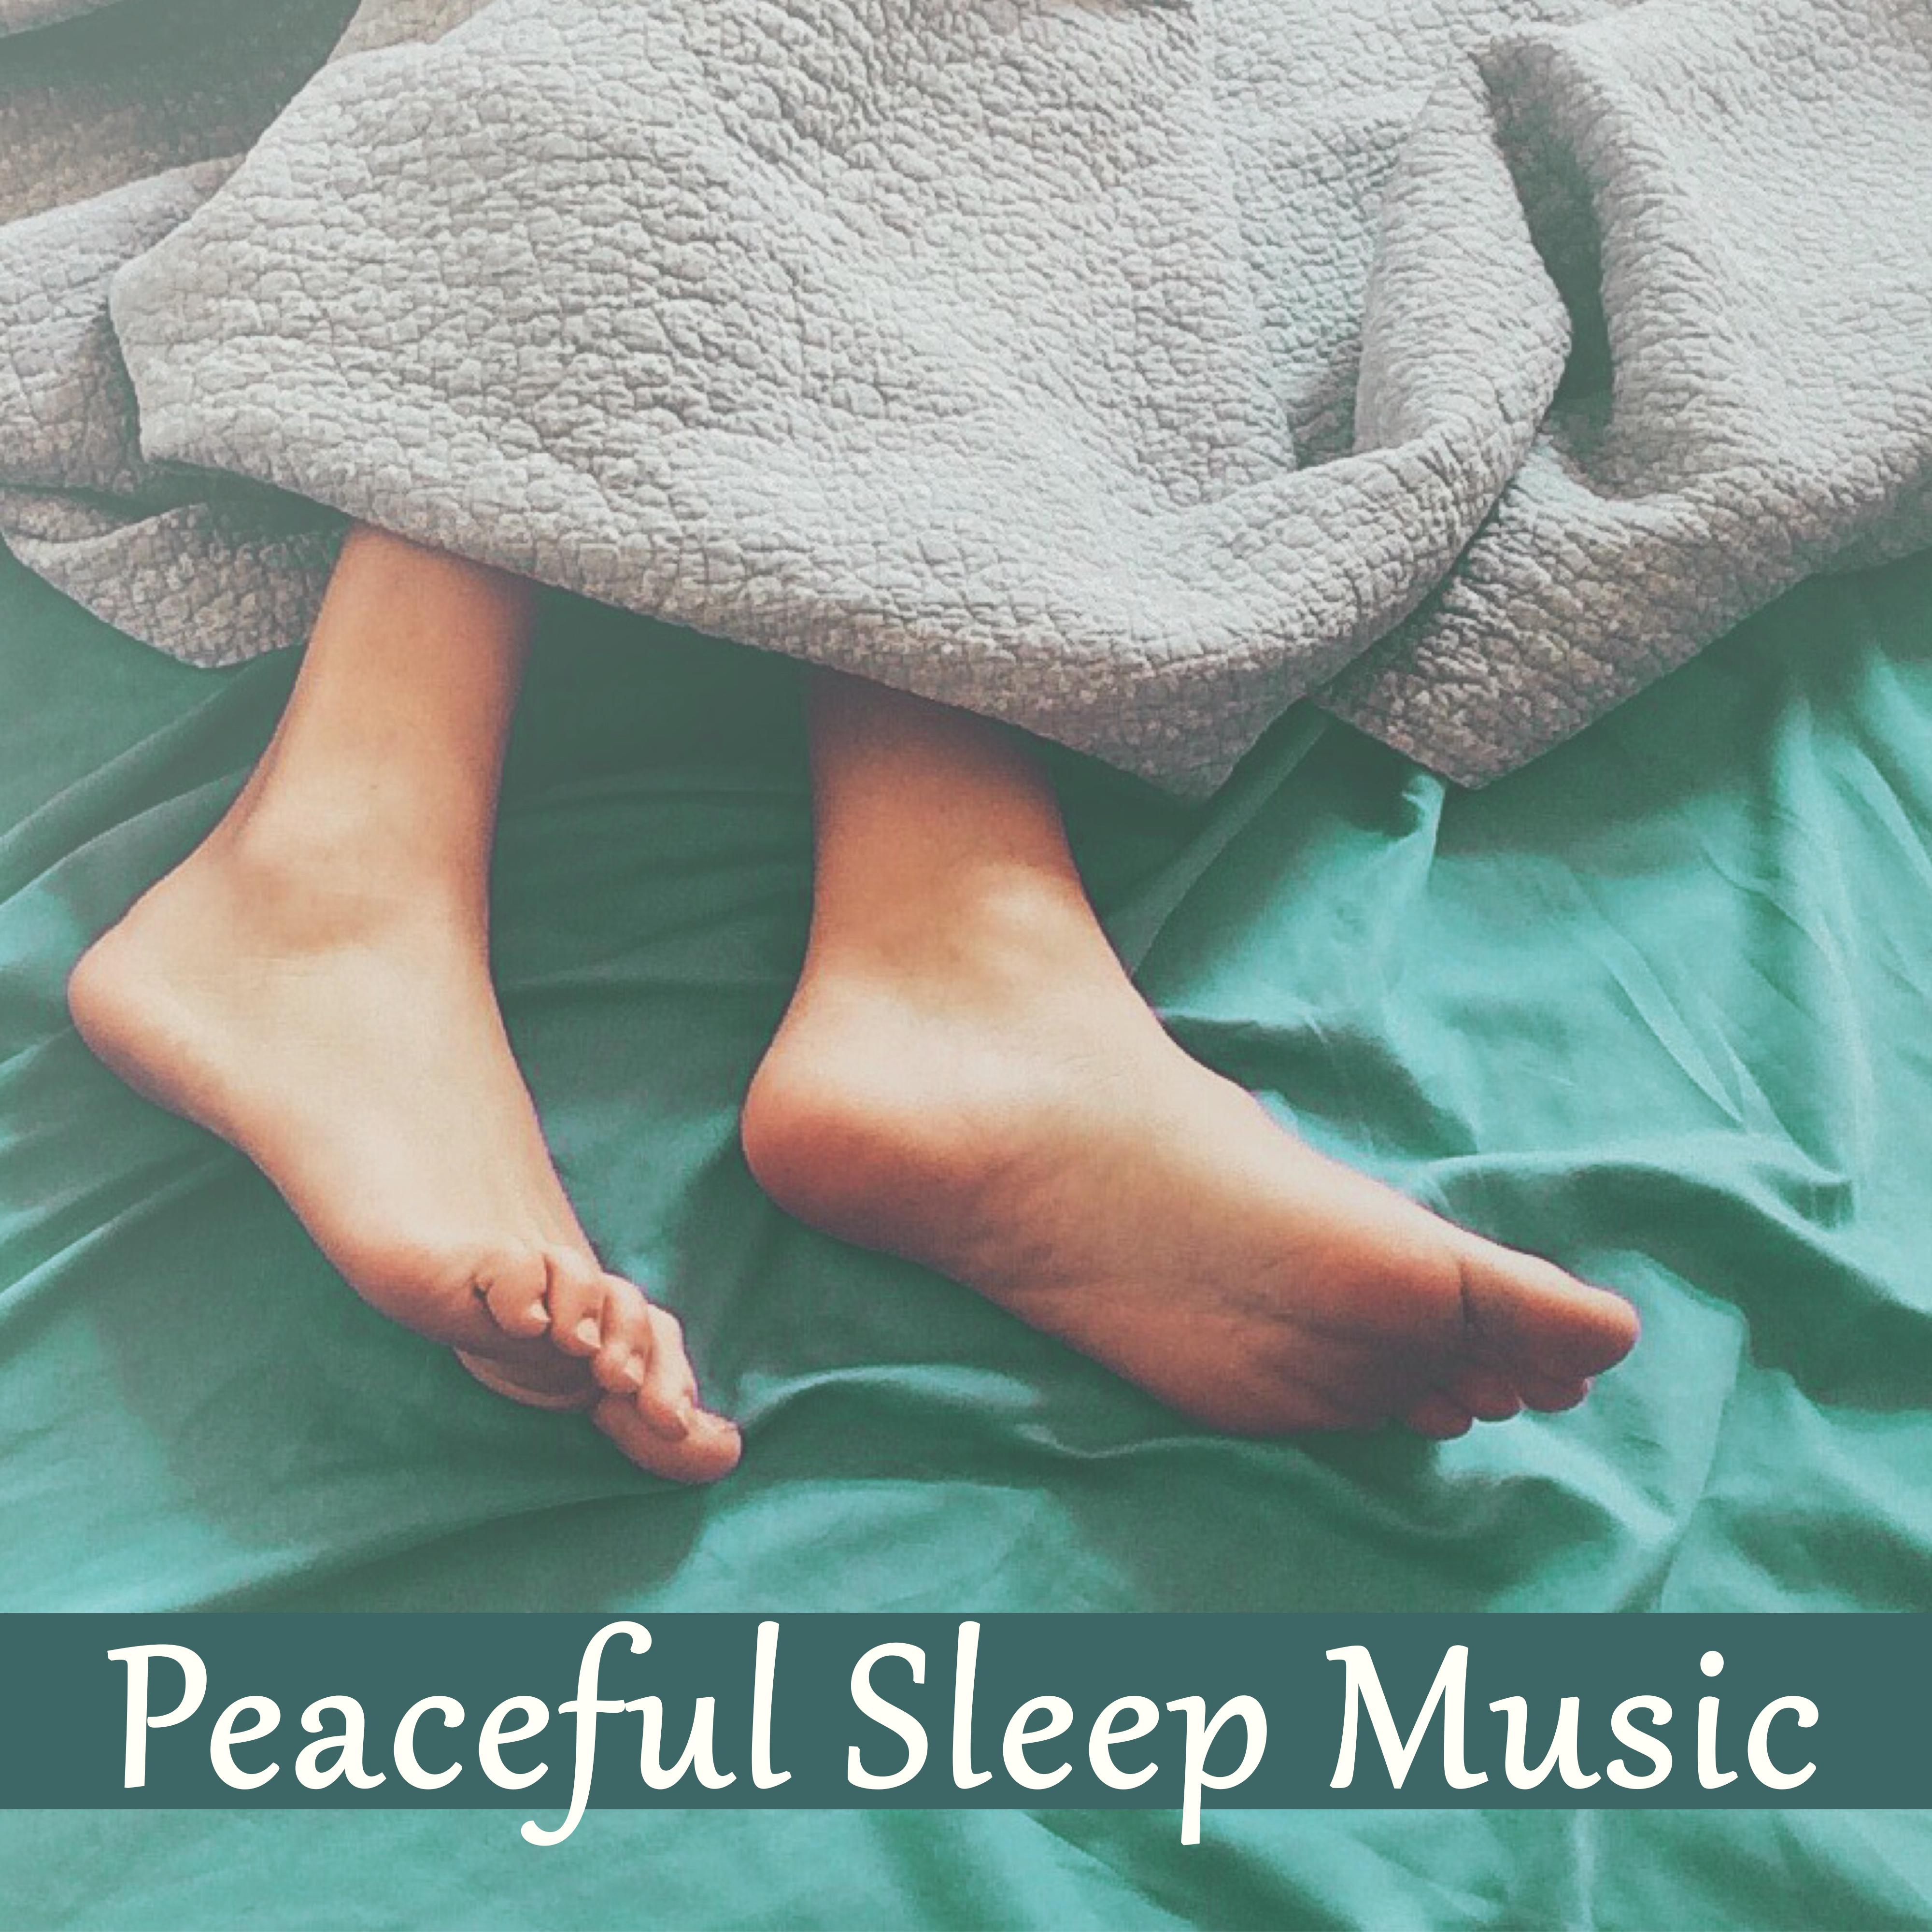 Peaceful Sleep Music  Deep Dreams, Sweet Lullaby, Calming Melodies to Pillow, Night Sounds, Relax, Bedtime, Restful Sleep